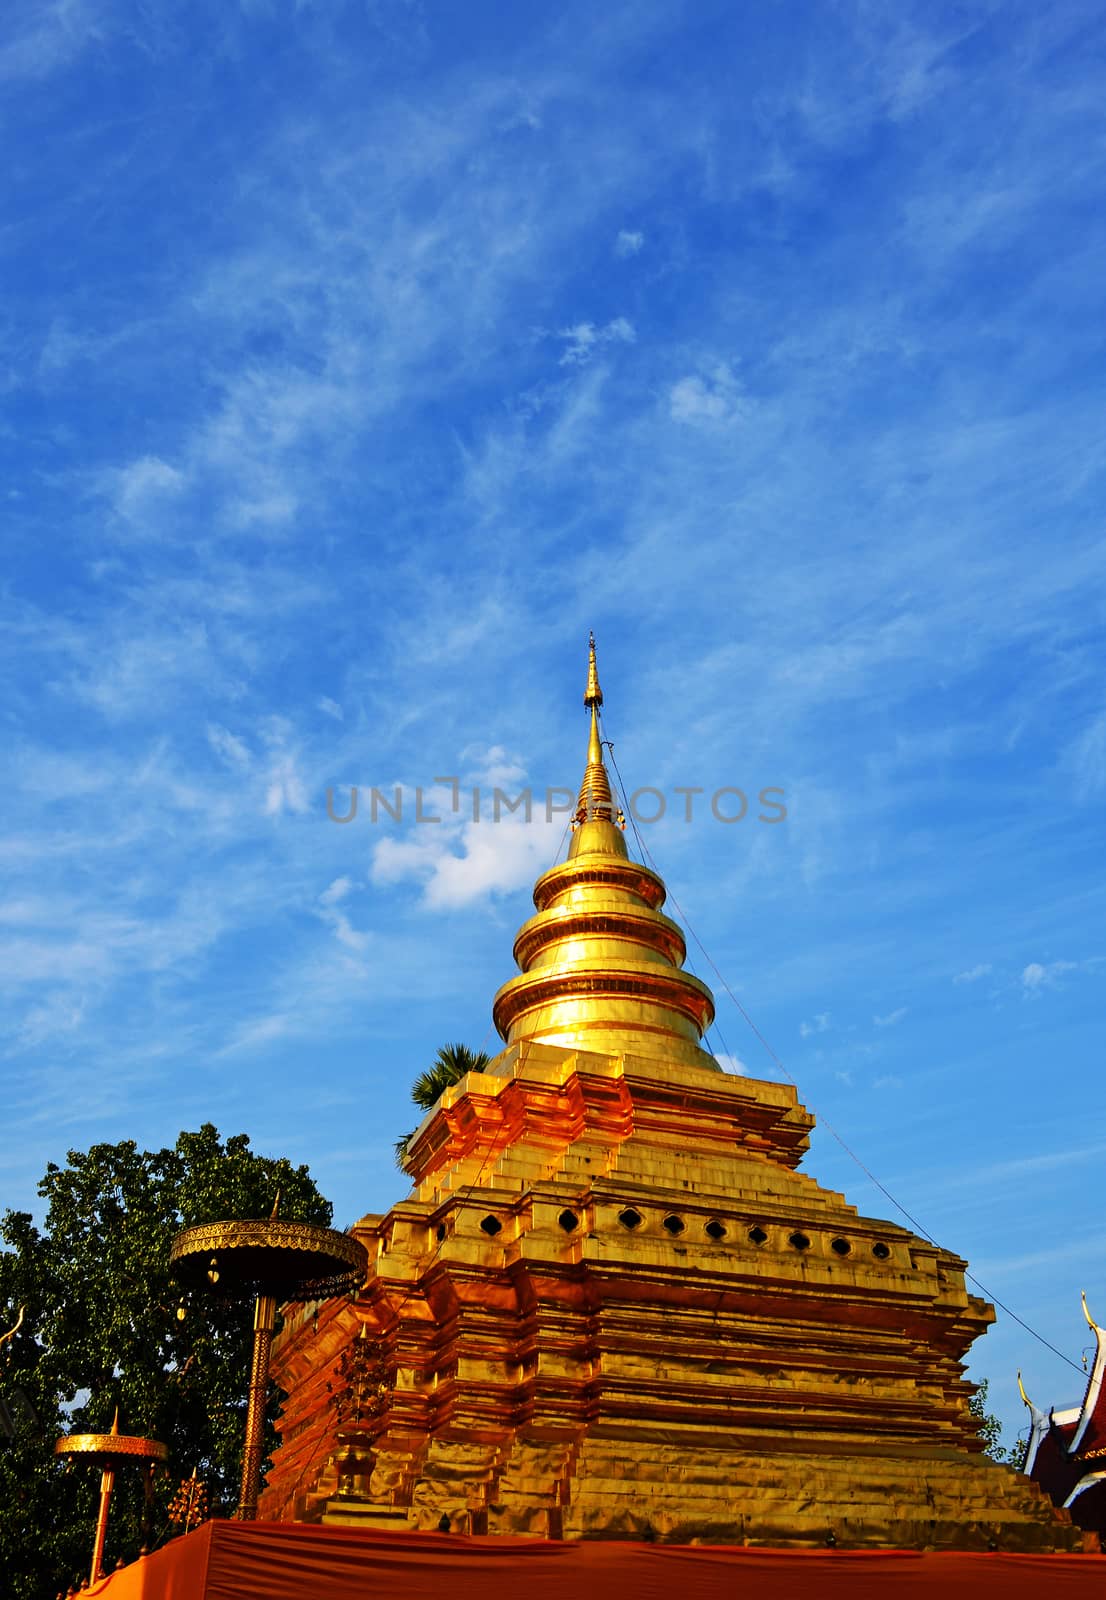 Phra That Sri Jom Thong , Series 1_6, Golden Pagoda with Cloud a by kobfujar